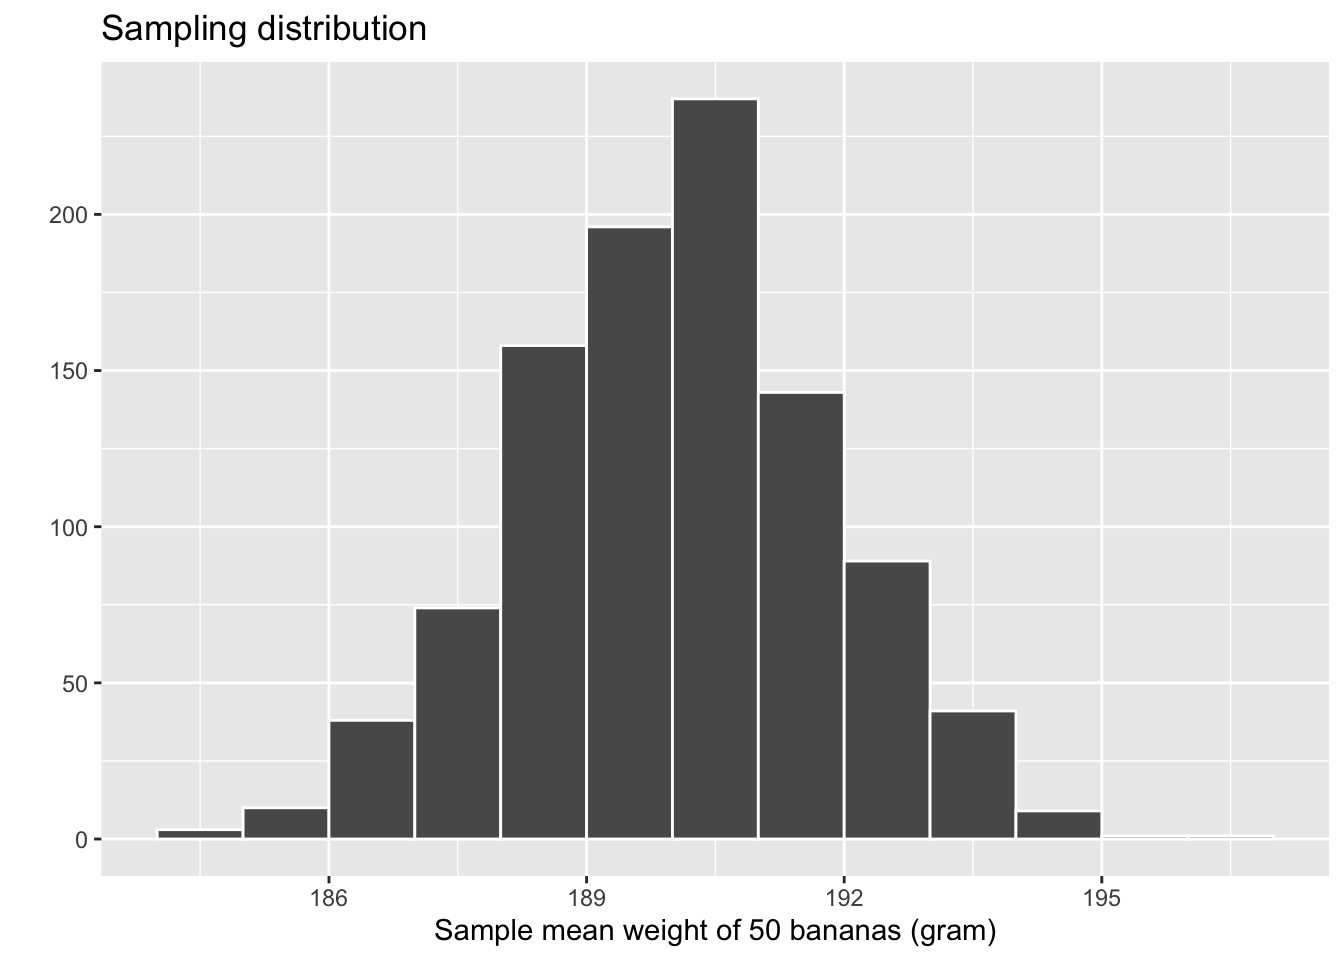 Previously seen sampling distribution of sample mean weight for $n = 1000$.